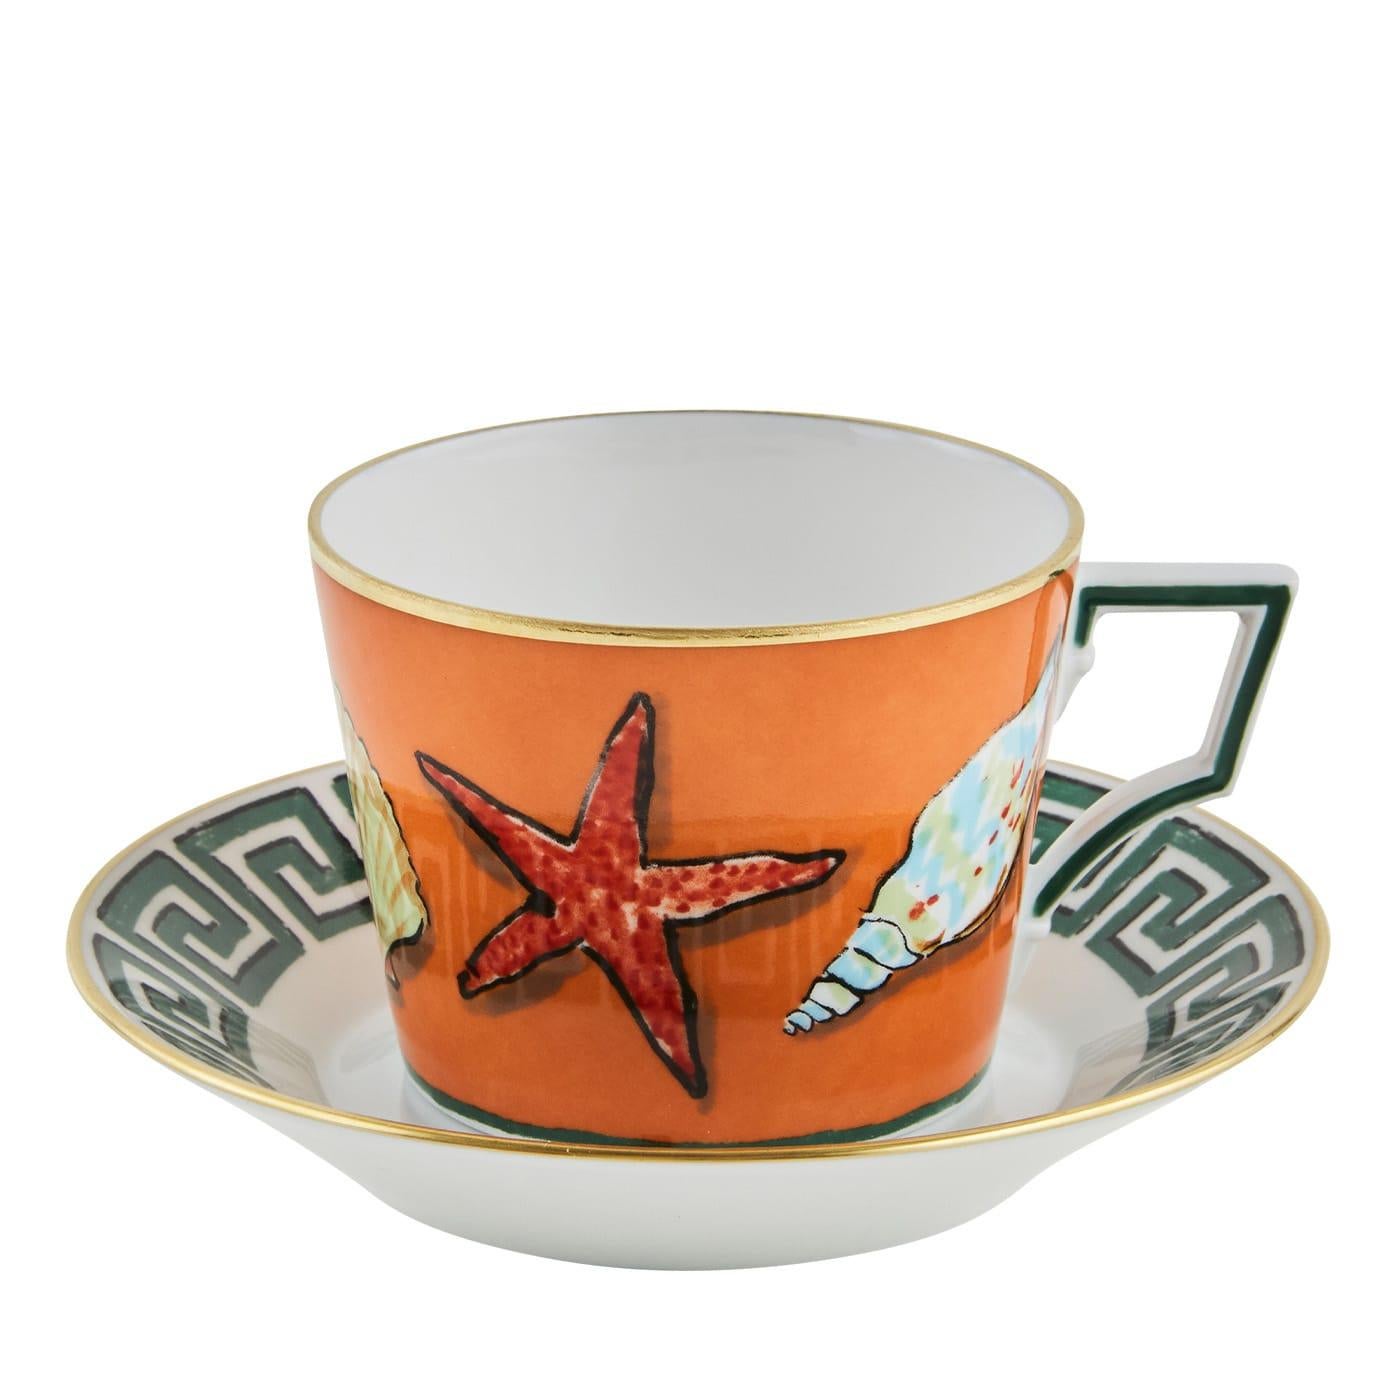 This stunning set of two tea cups and two saucers is a vibrant interpretation of classical elegance by designer Luke Edward Hall. The kingdom of Neptune, the Roman god of the sea, lives in vivid colors and exquisite rendition of marine life on fine